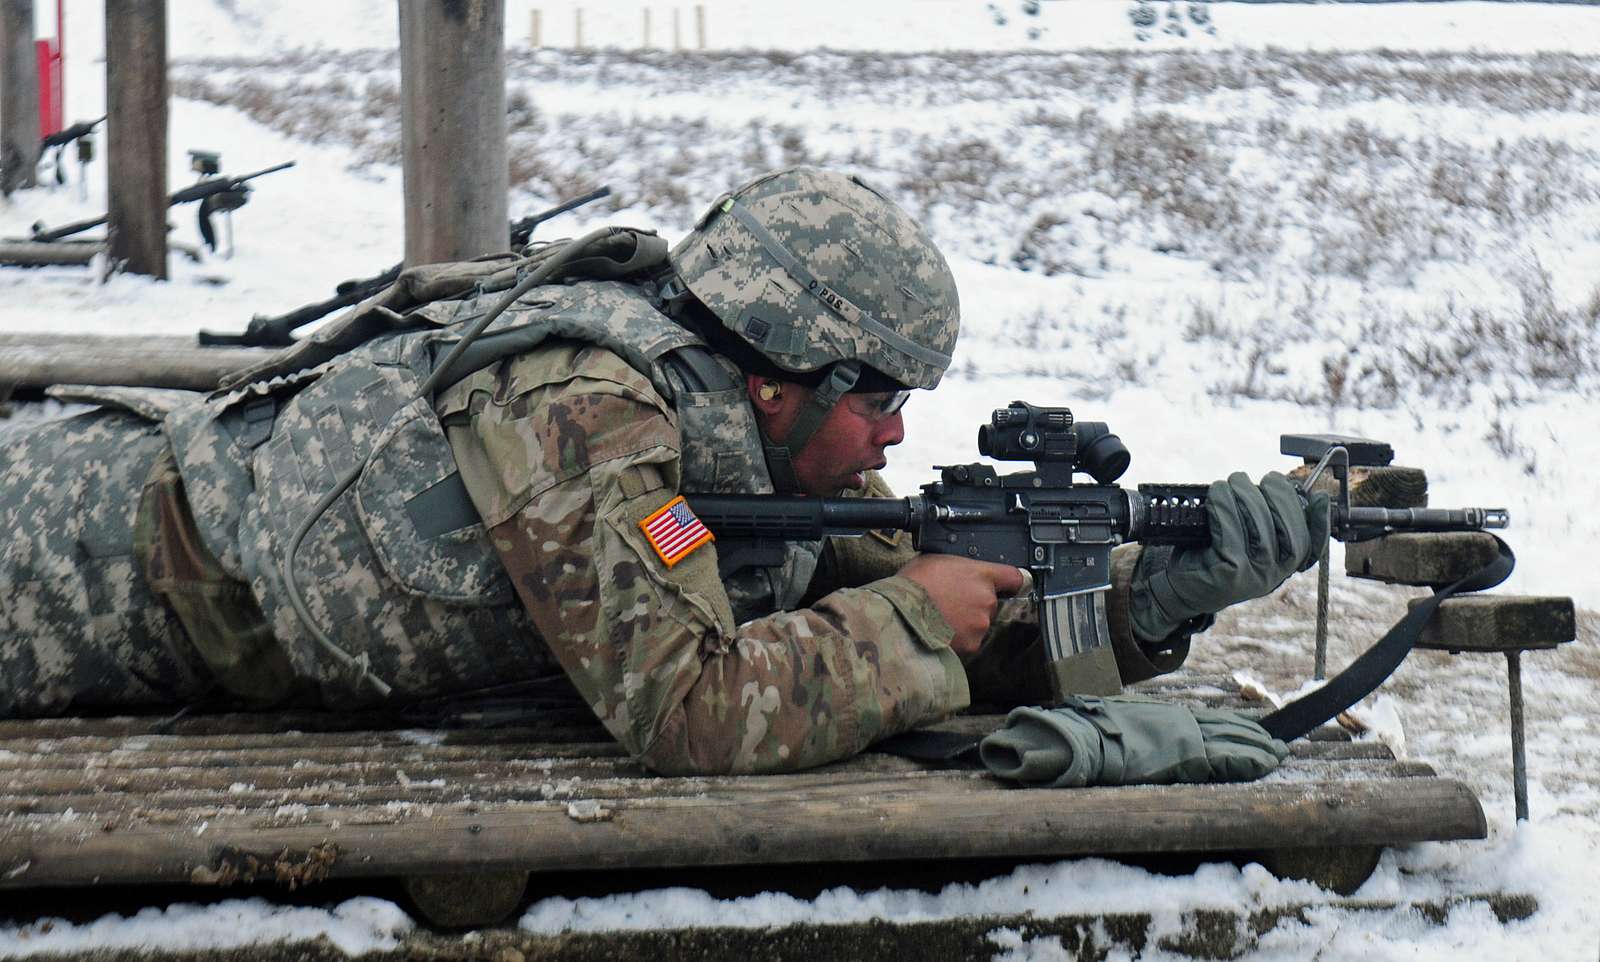 DVIDS - News - 2CR Snipers protect vital comms terminal in Dragoon Ready